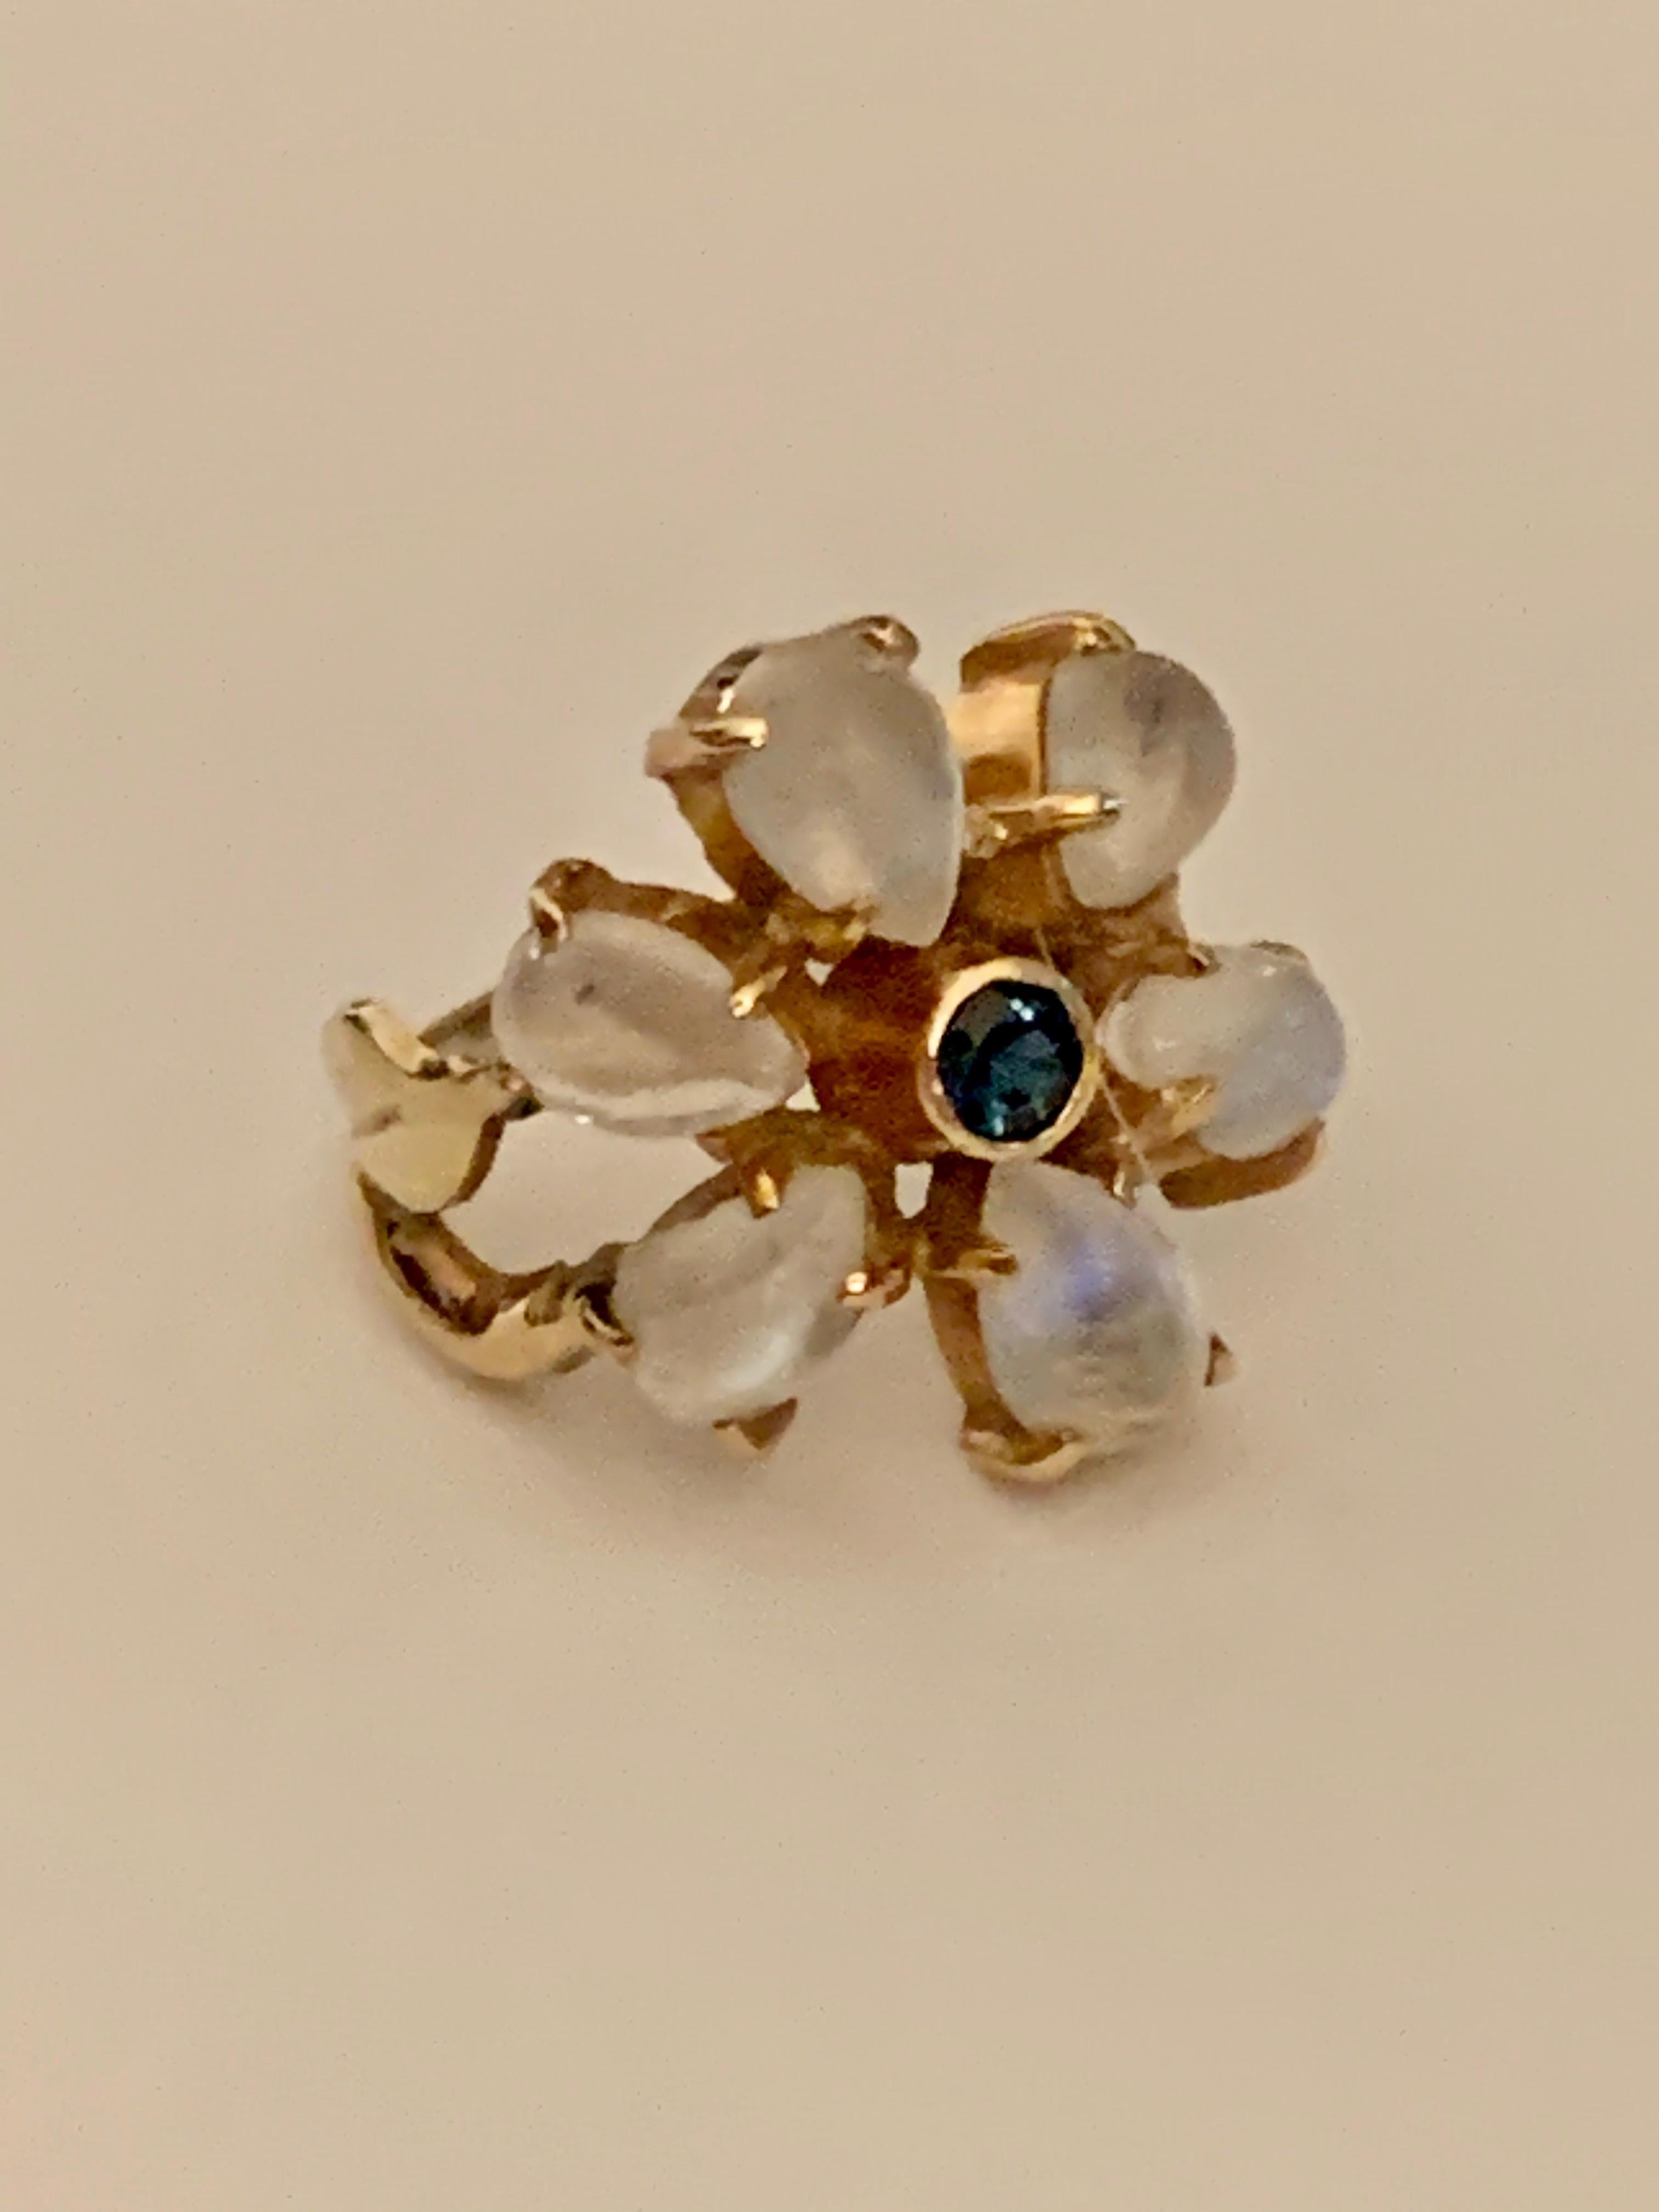 This ring is a moonstone-lovers dream.  There are six tear drop shaped moonstones surrounding a blue Sapphire in the center of the ring. 
The setting is 14 karat yellow Gold and features a split shank on each side of the center moonstone